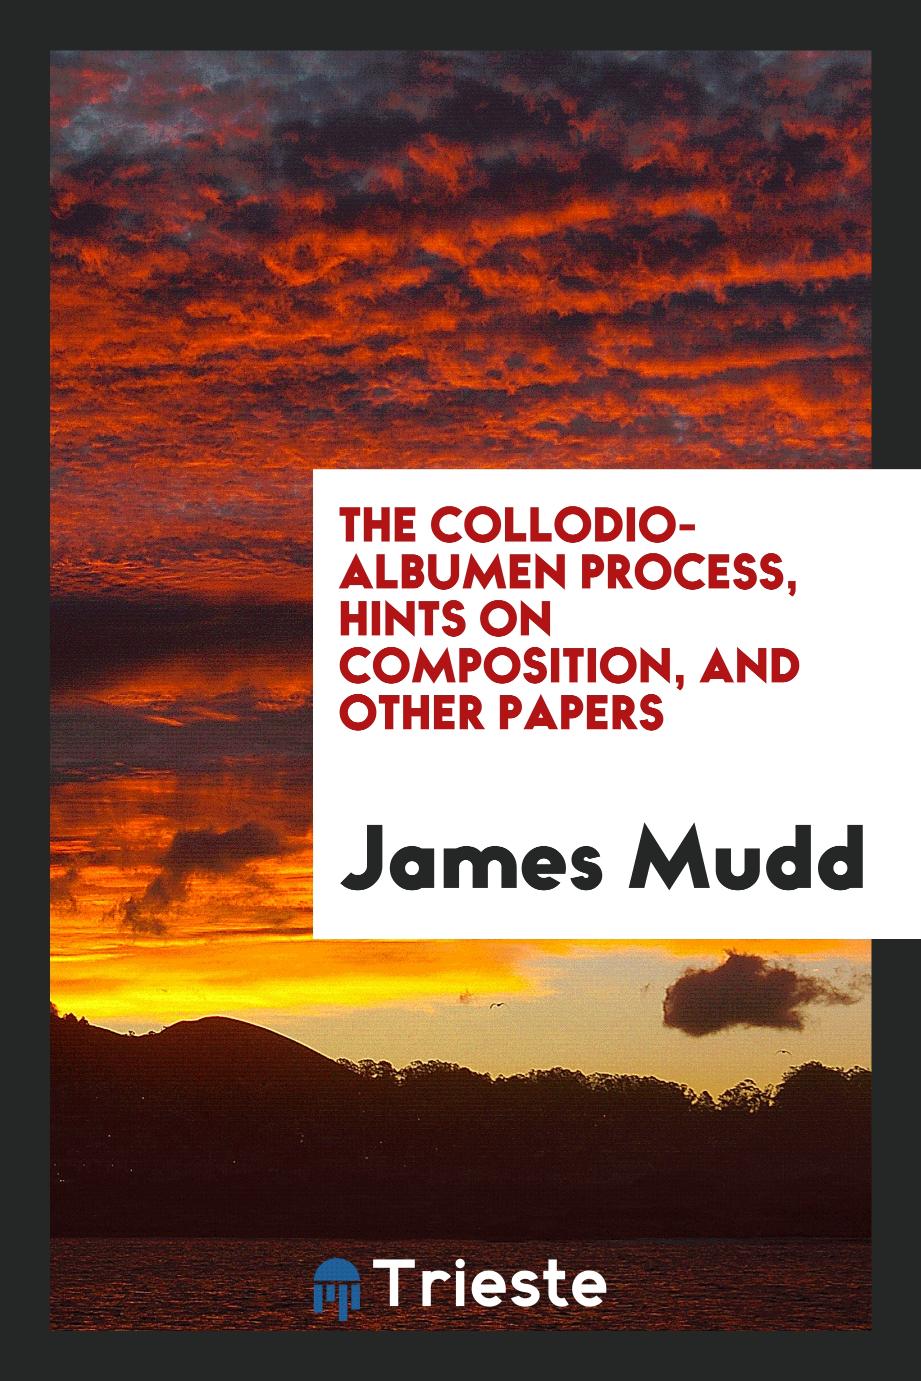 The collodio-albumen process, hints on composition, and other papers